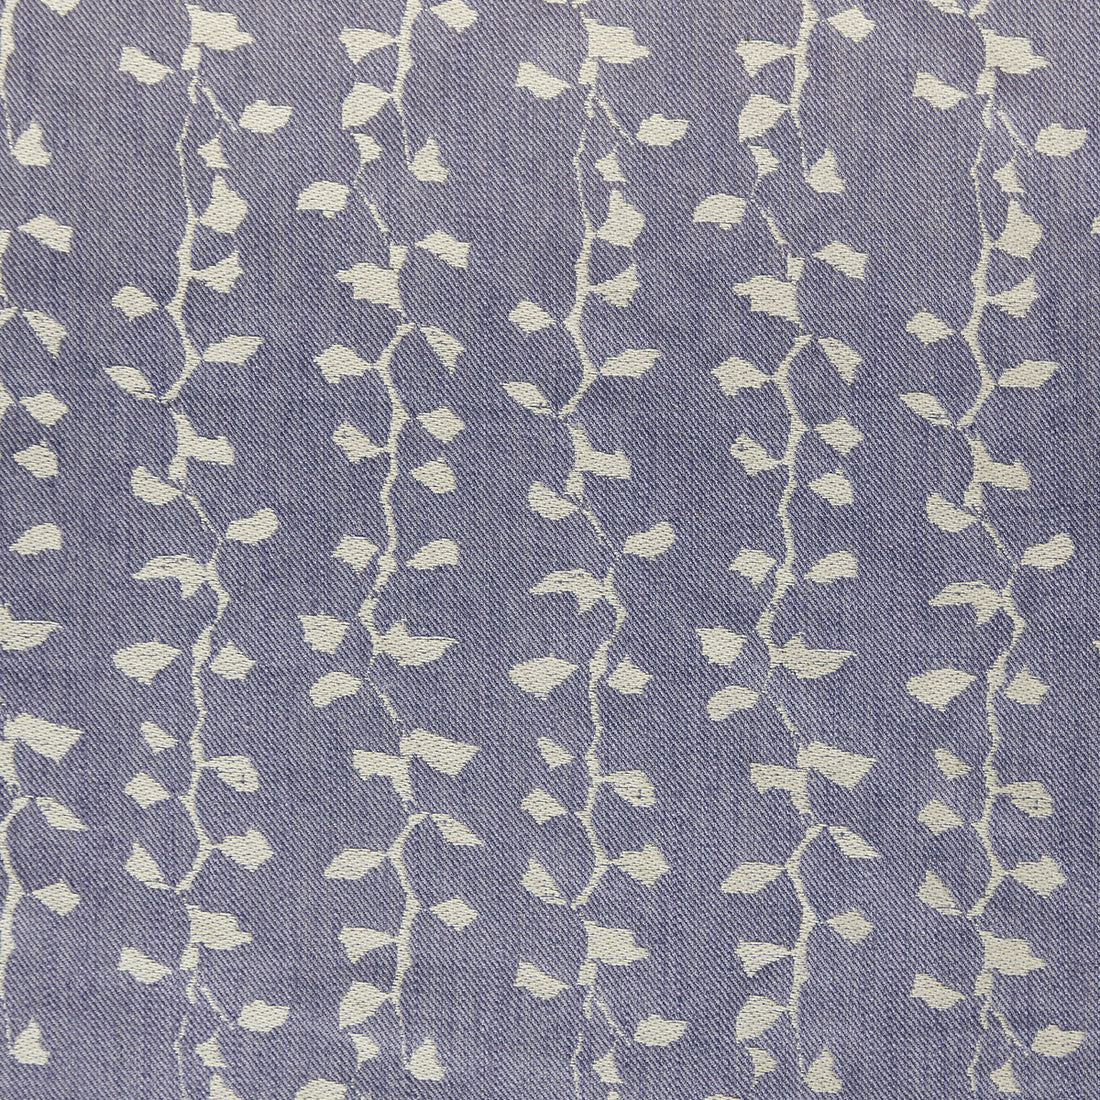 Jungle fabric in lavender color - pattern GWF-3203.510.0 - by Lee Jofa Modern in the Allegra Hicks Islands collection